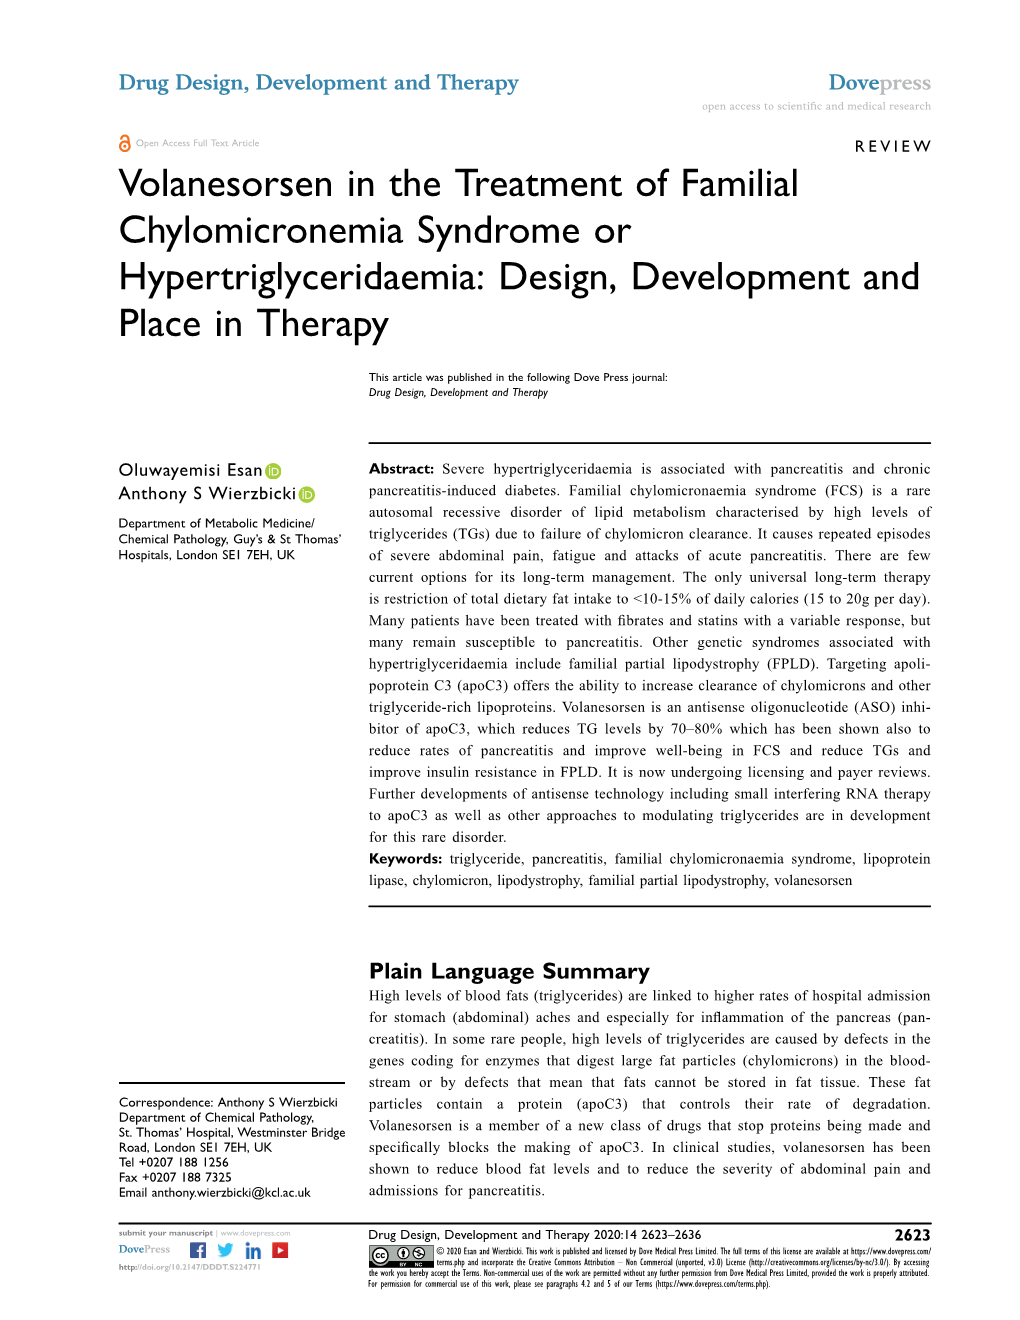 Volanesorsen in the Treatment of Familial Chylomicronemia Syndrome Or Hypertriglyceridaemia: Design, Development and Place in Therapy